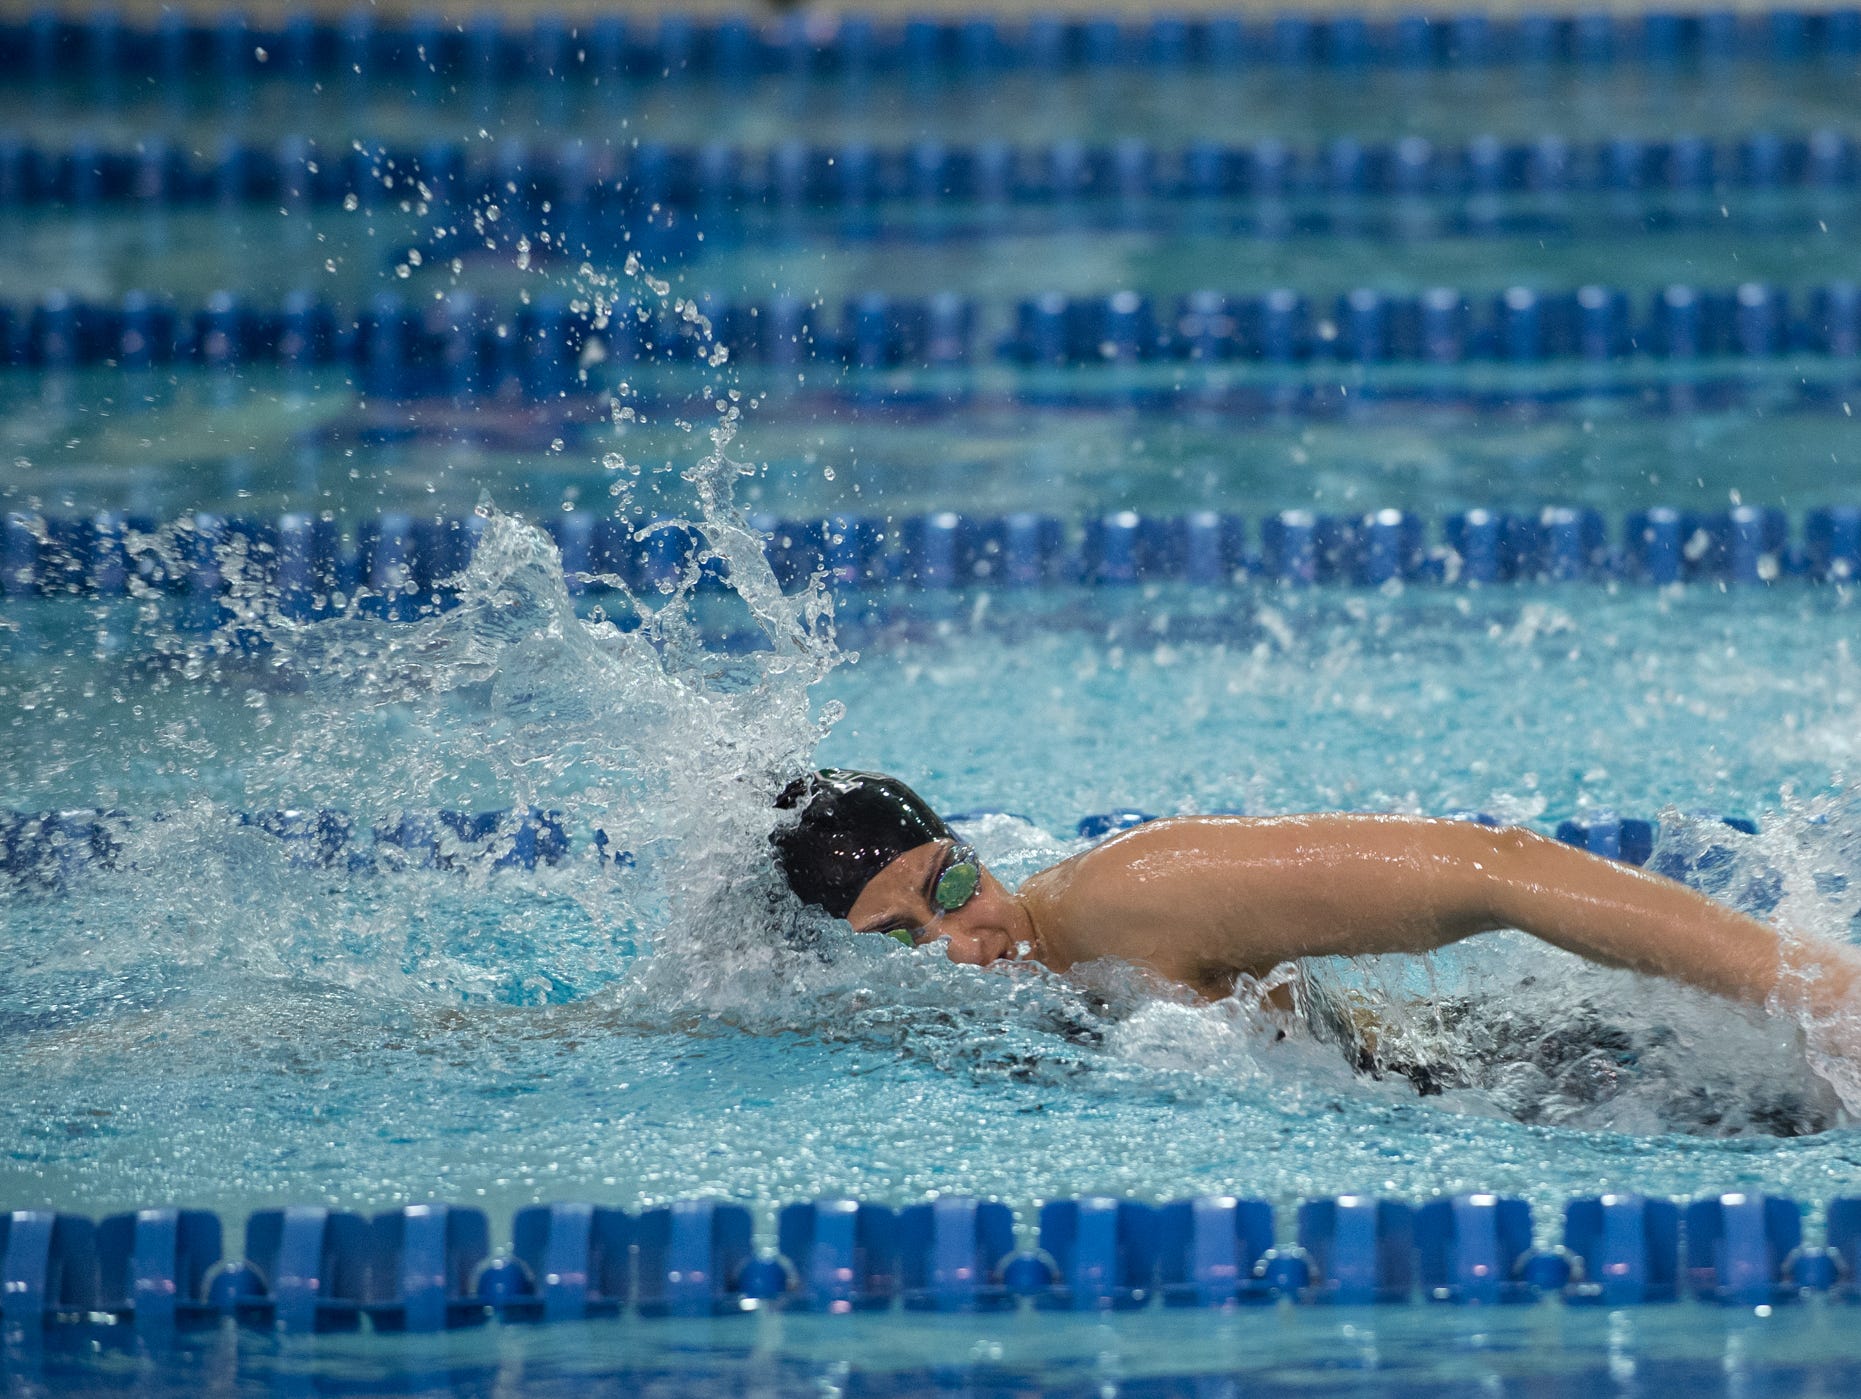 Archmere Academy's Ellie Jogani swims in the 100 yard freestyle final at the girl's DIAA swimming and diving championships at the University of Delaware.